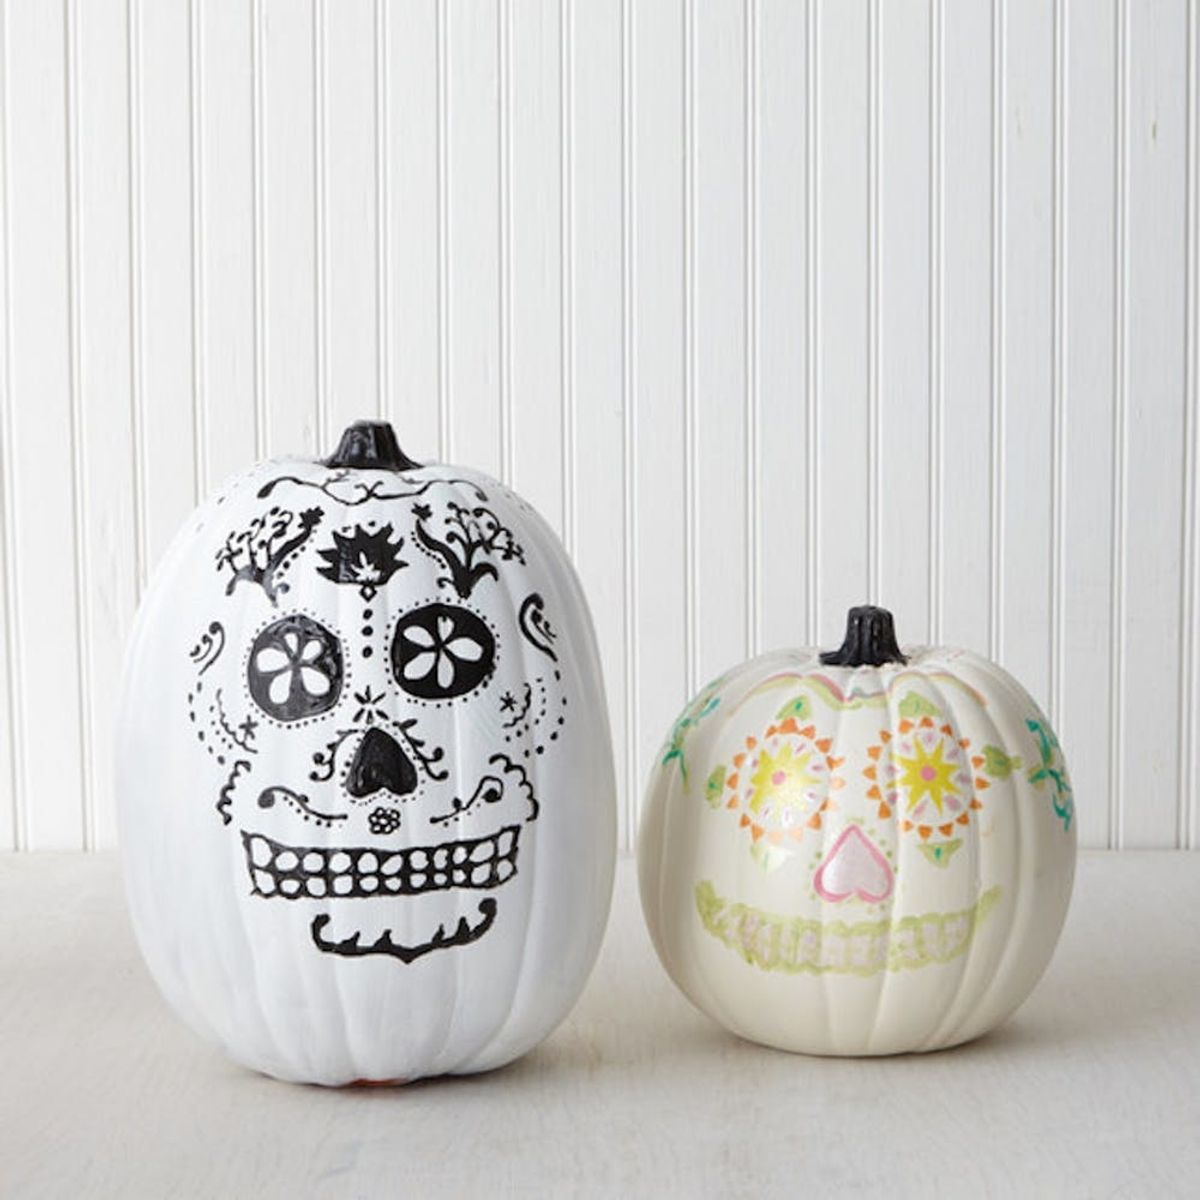 Pinterest’s Top No-Carve Trends for an Easy (and Mess-Free) Halloween